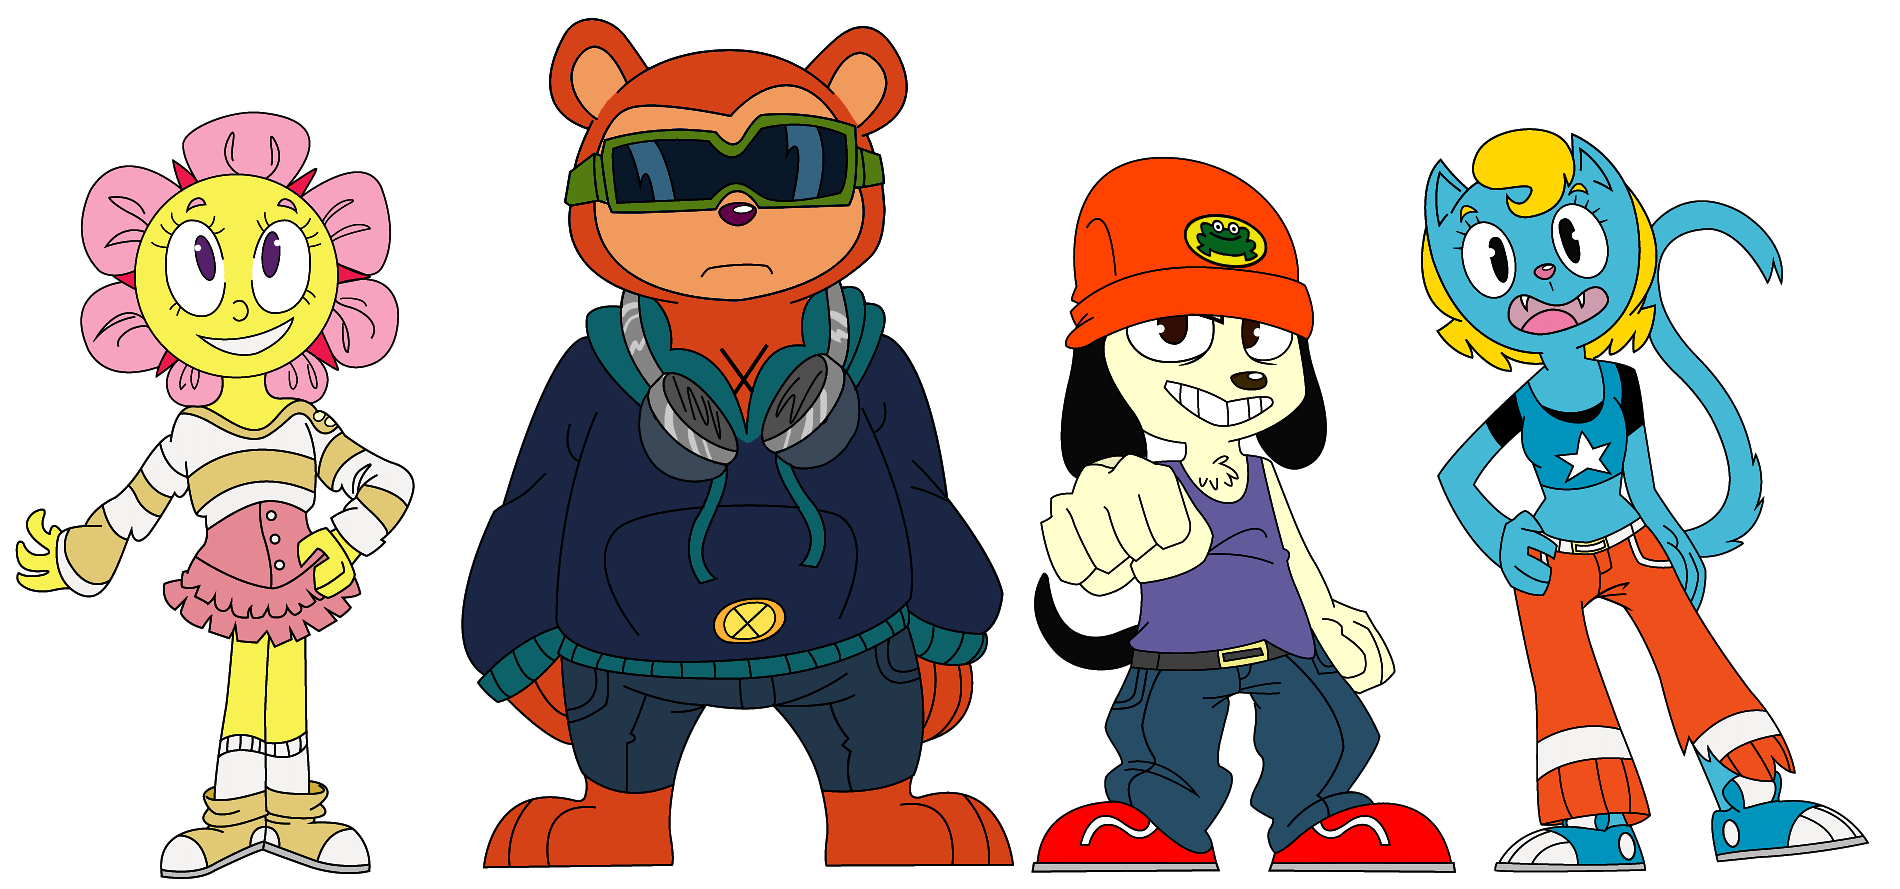 Parappa the Rapper image PaRappa Team HD wallpaper and background